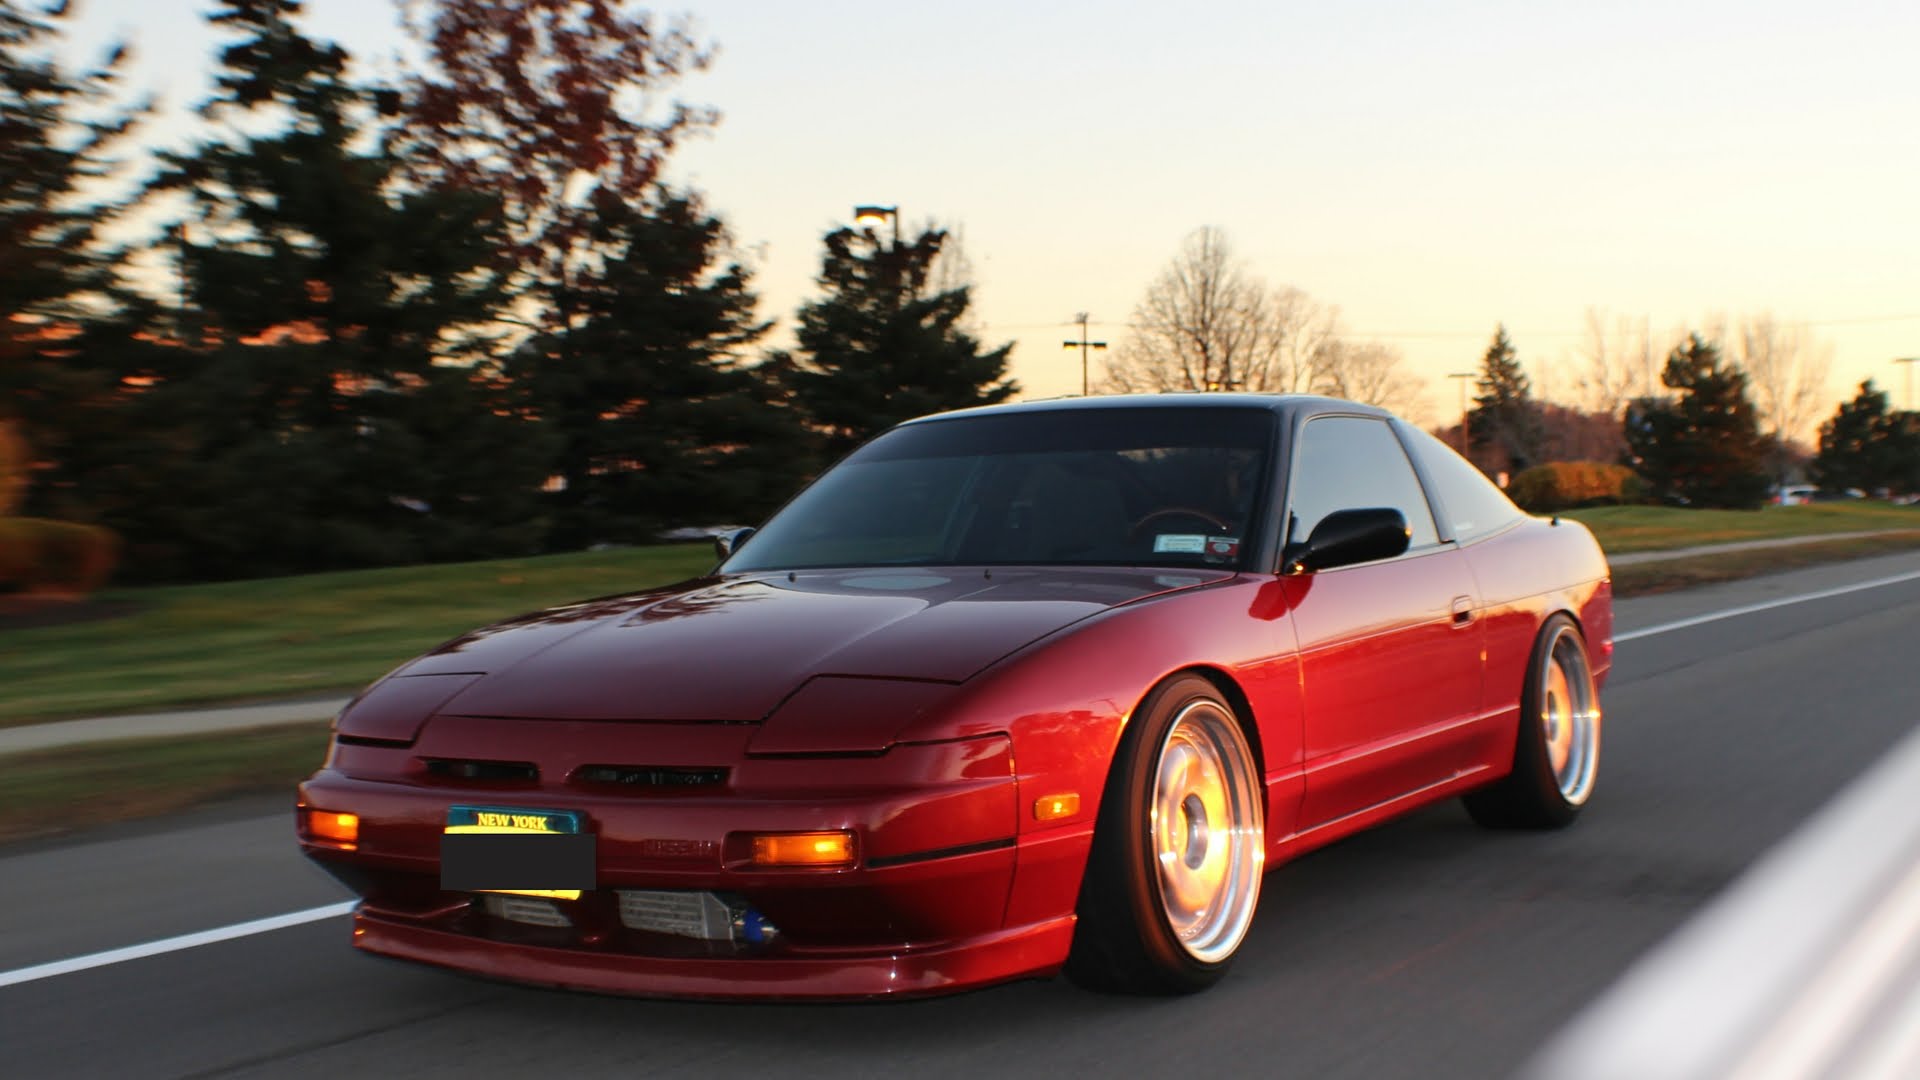 Nice Images Collection: Nissan 240SX Desktop Wallpapers